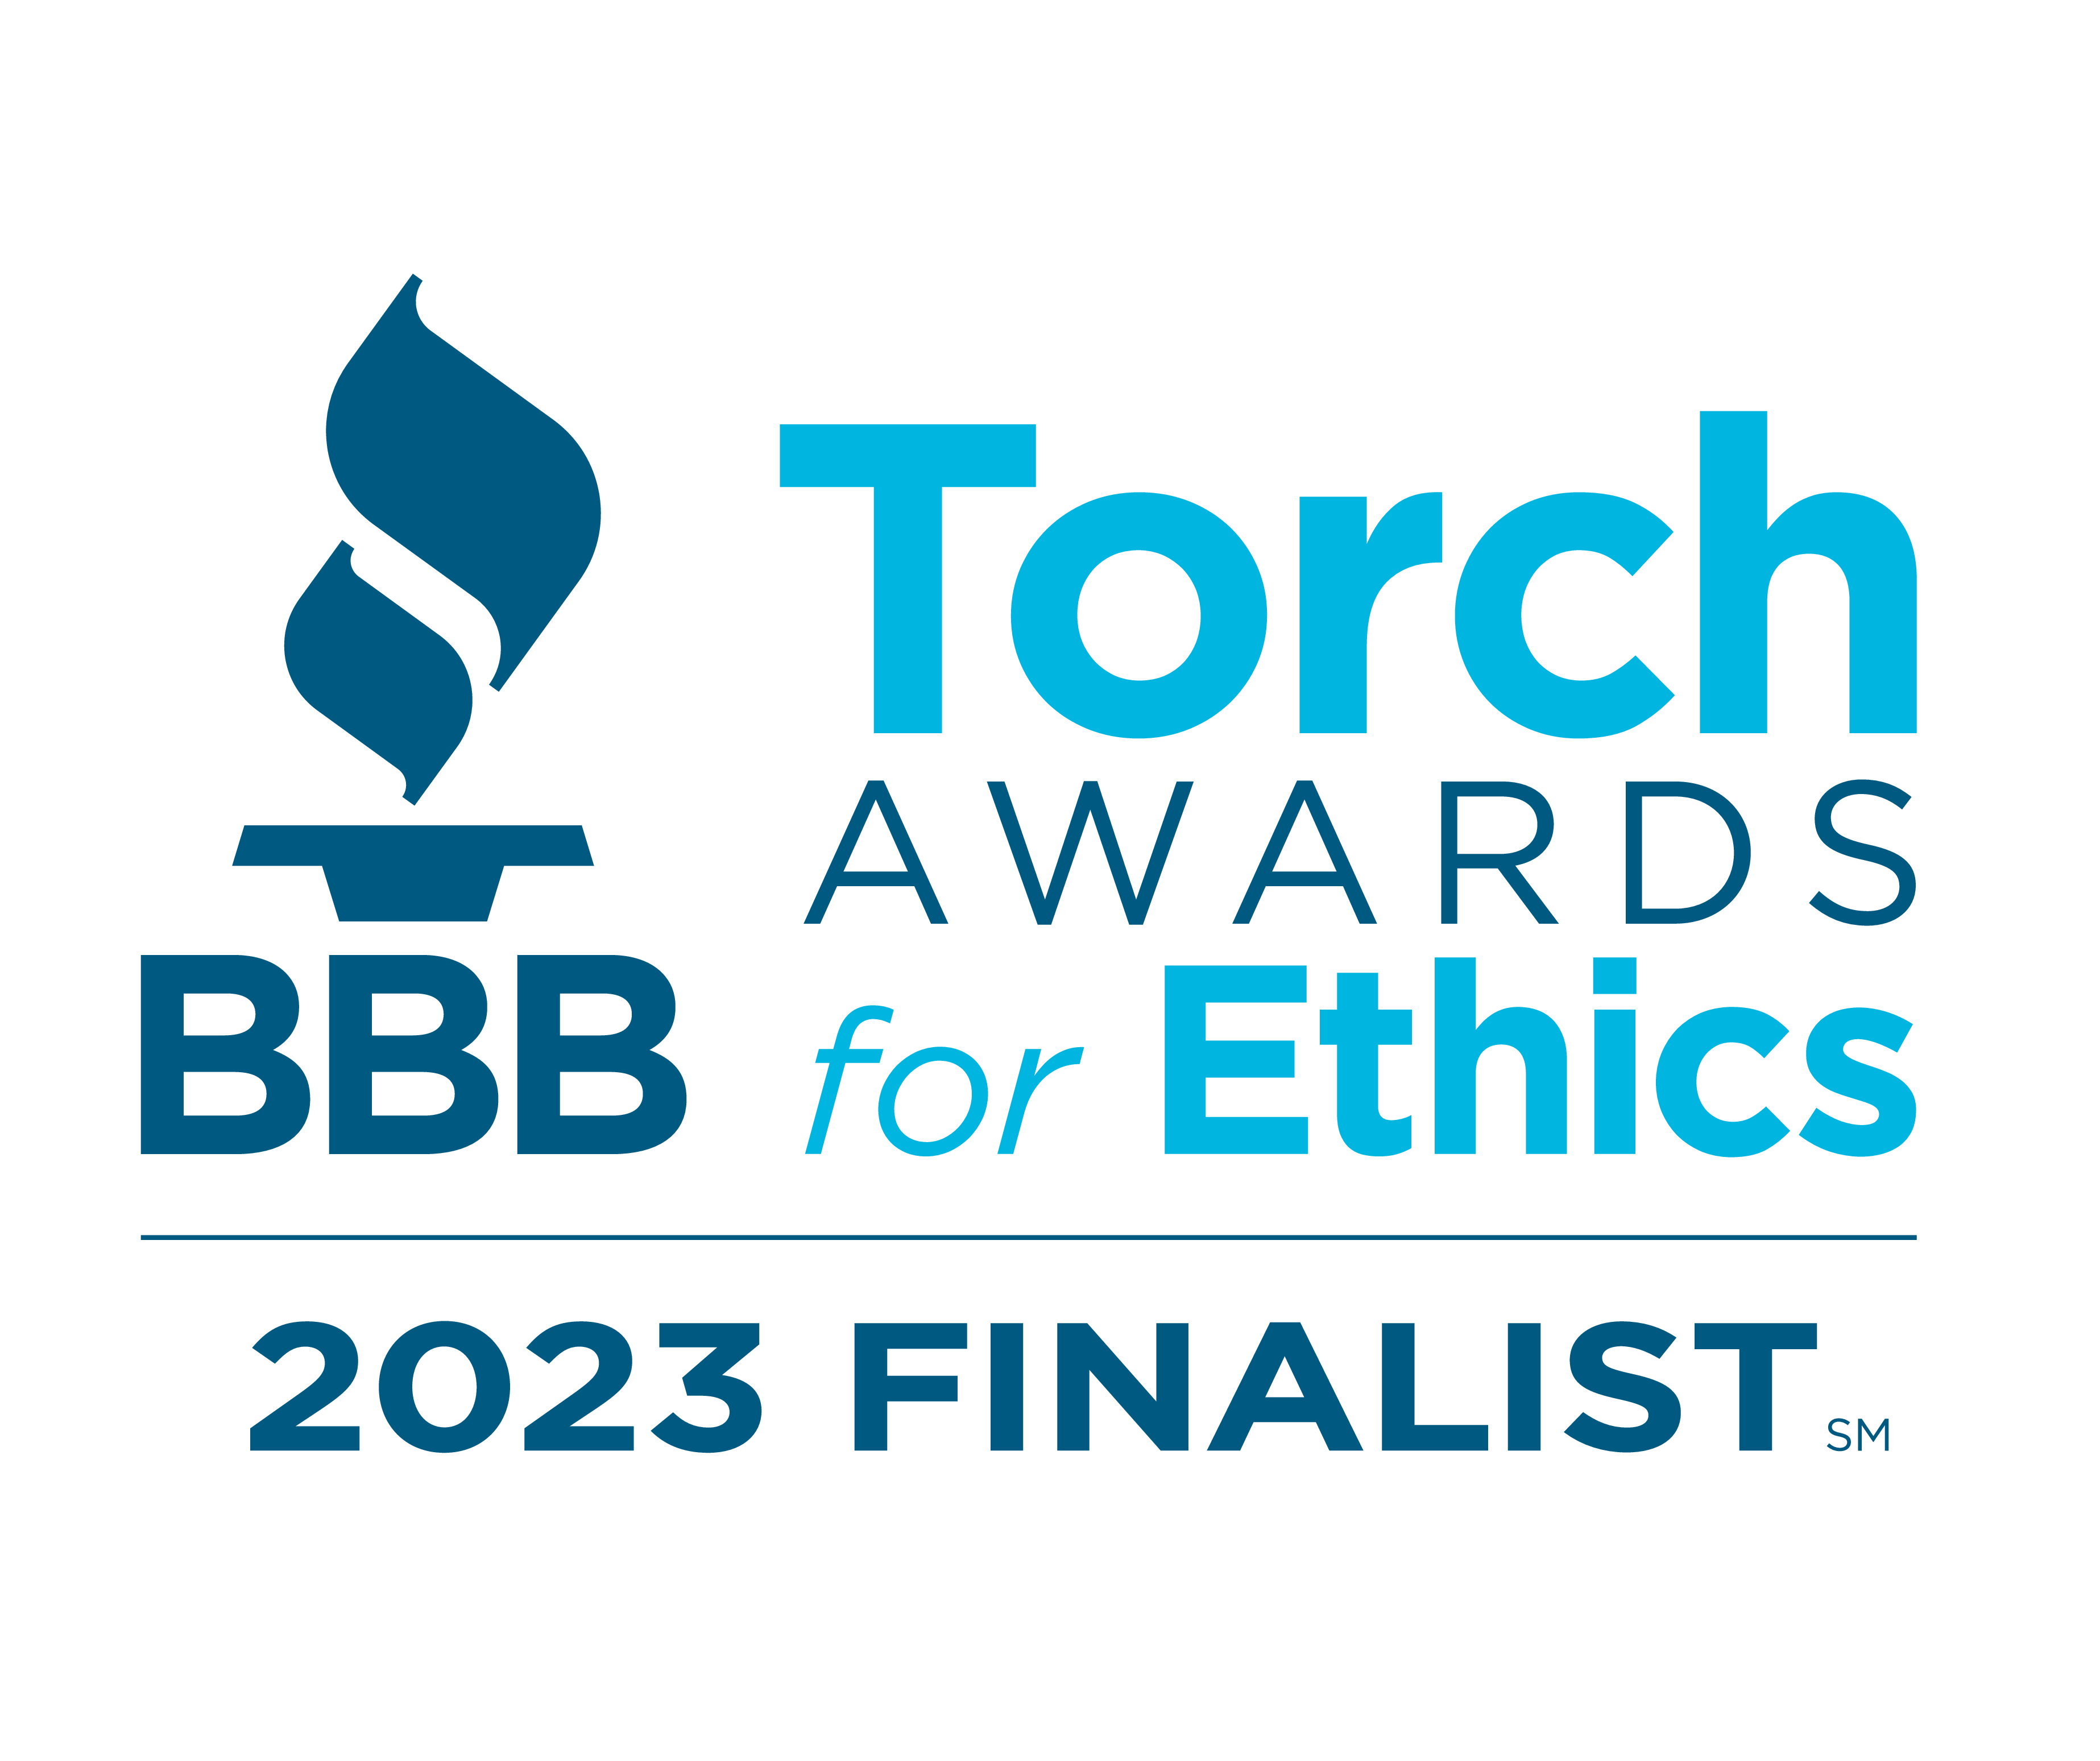 BBB Torch Awards for Ethics 2023